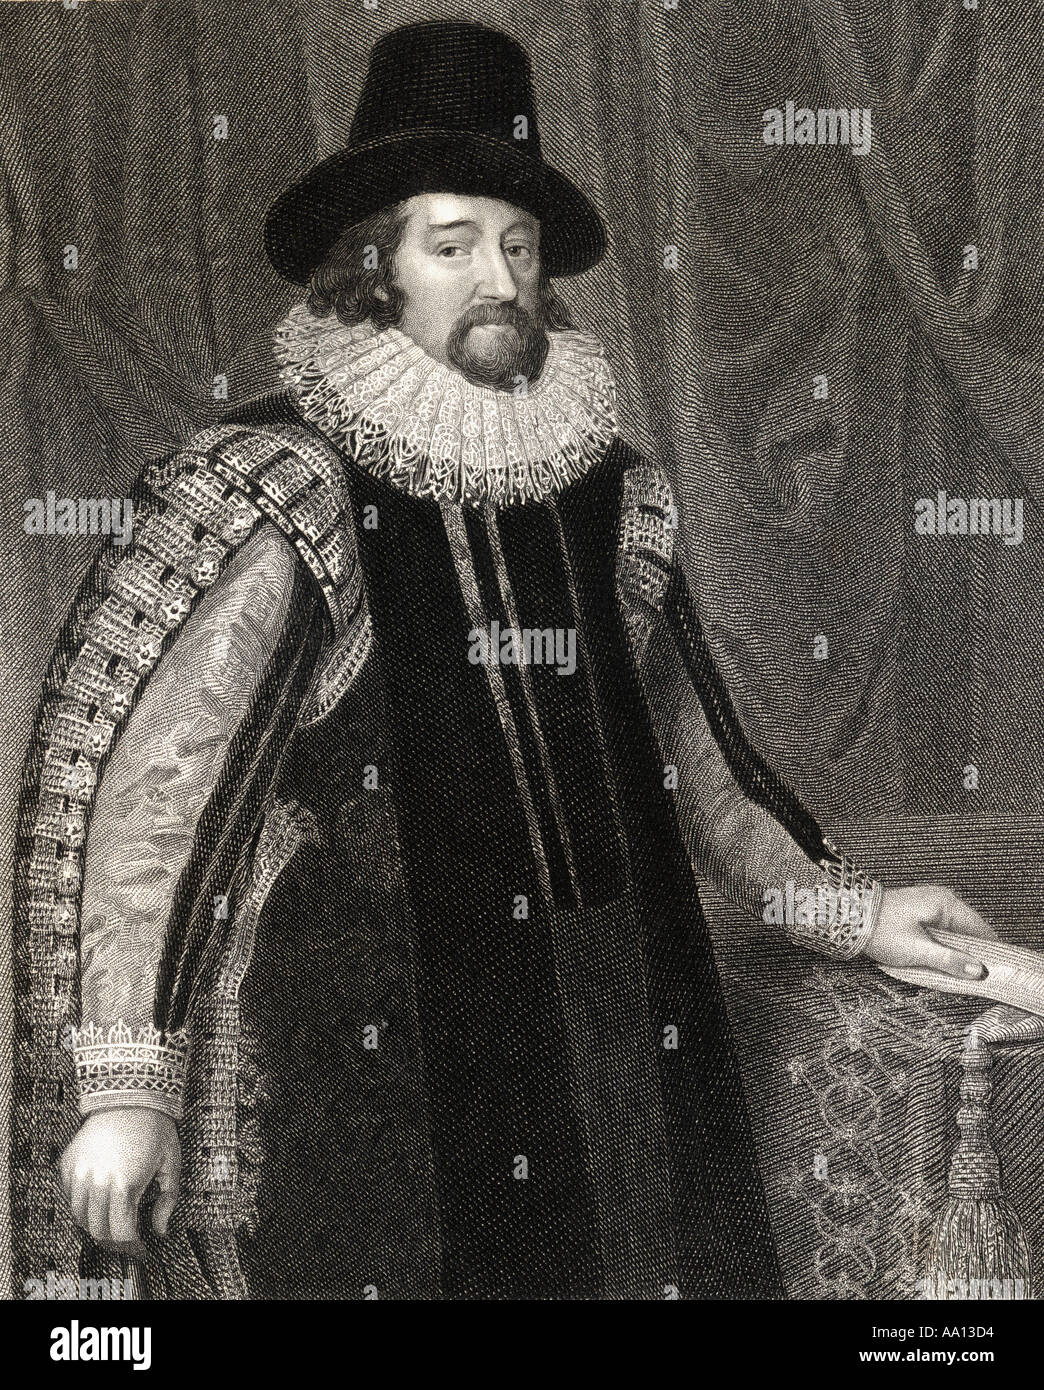 Francis Bacon, 1st Viscount St Alban, 1561 - 1626. English philosopher, statesman, scientist, jurist, orator, and author. Stock Photo